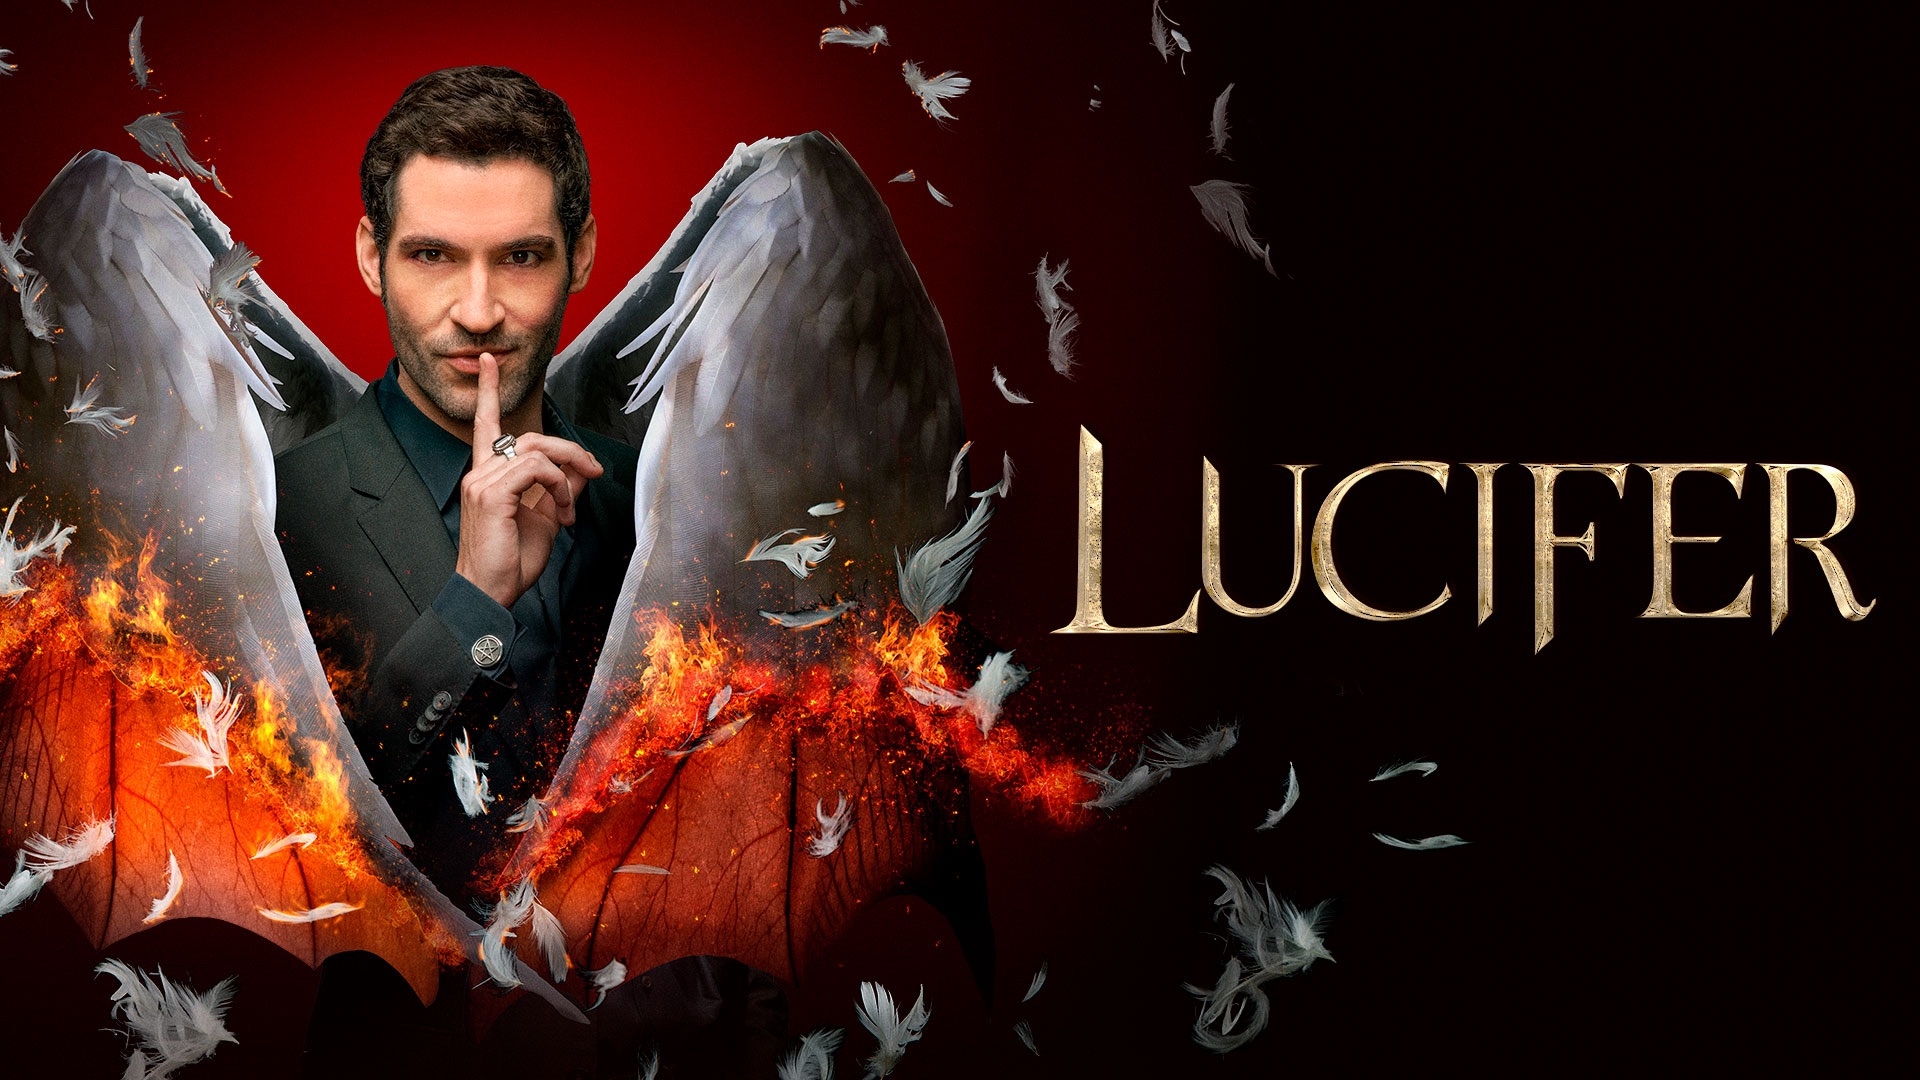 Lucifer Wallpapers - Top 35 Best Lucifer Wallpapers Download